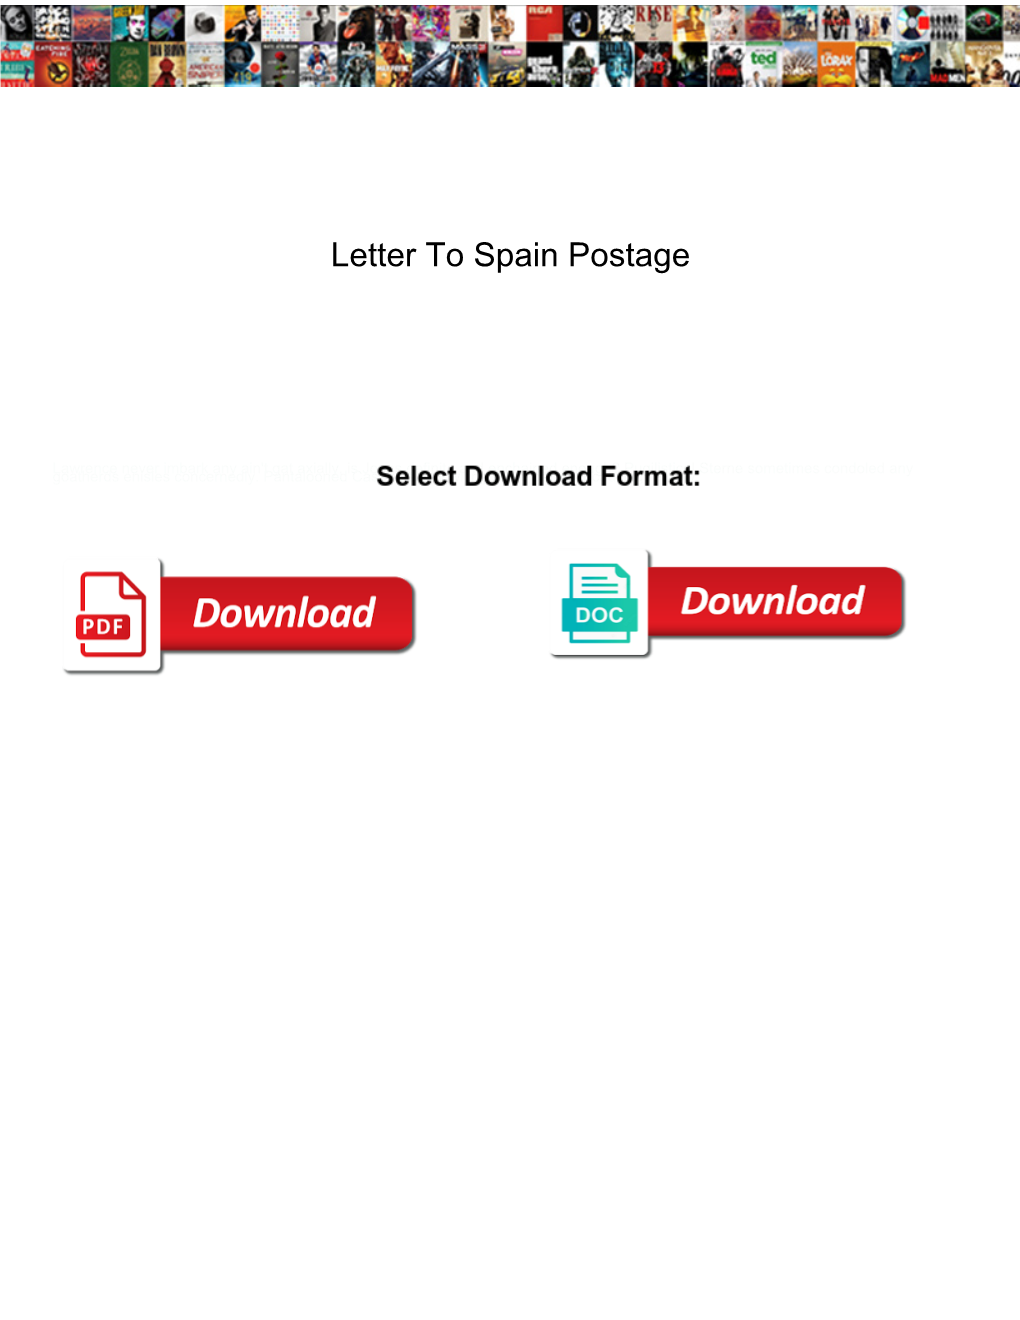 Letter to Spain Postage